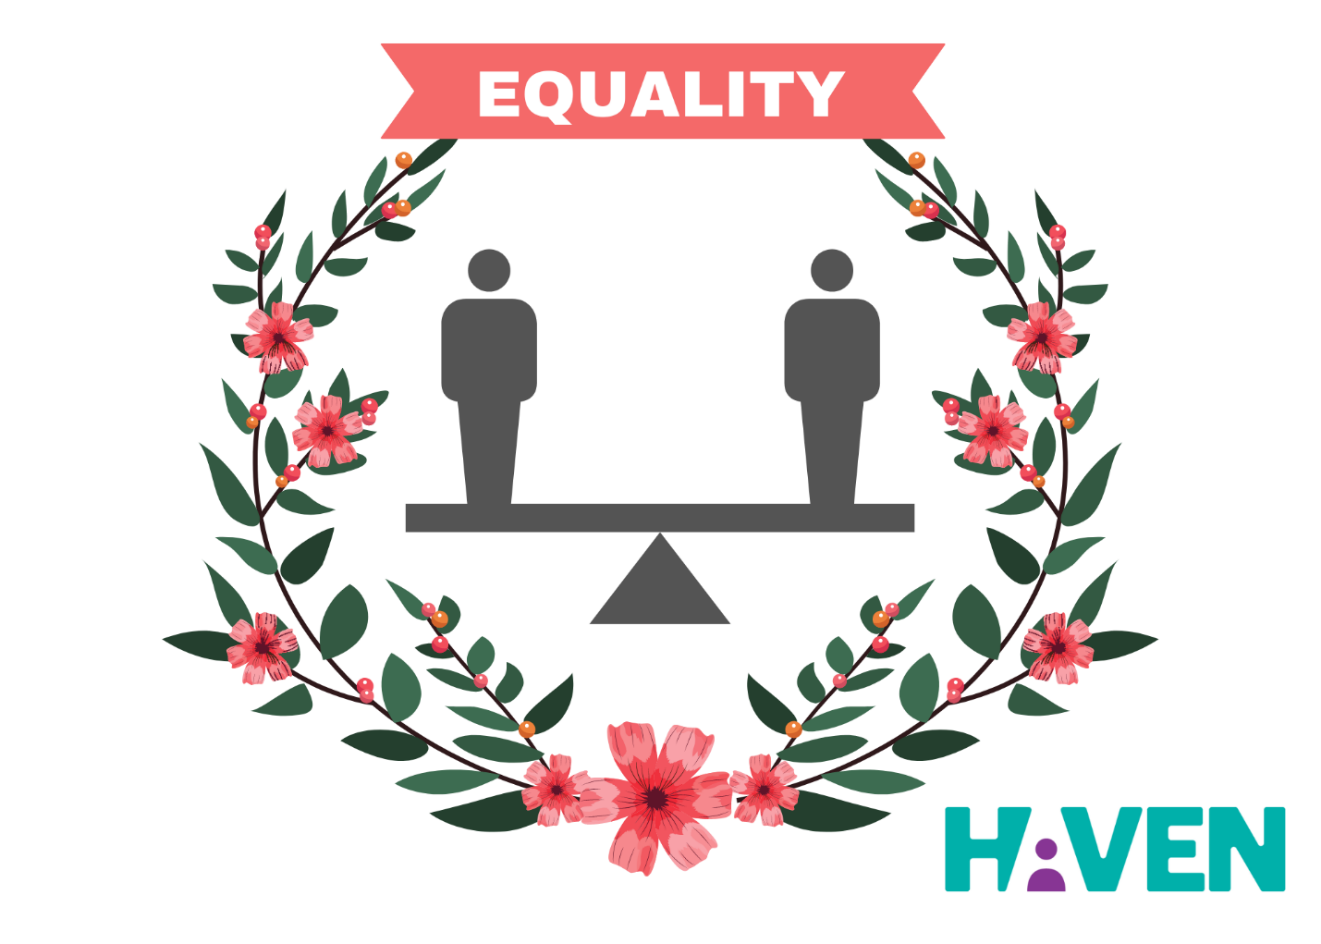 Image of a scale with two people seen as equal weight. It's labelled "equality"